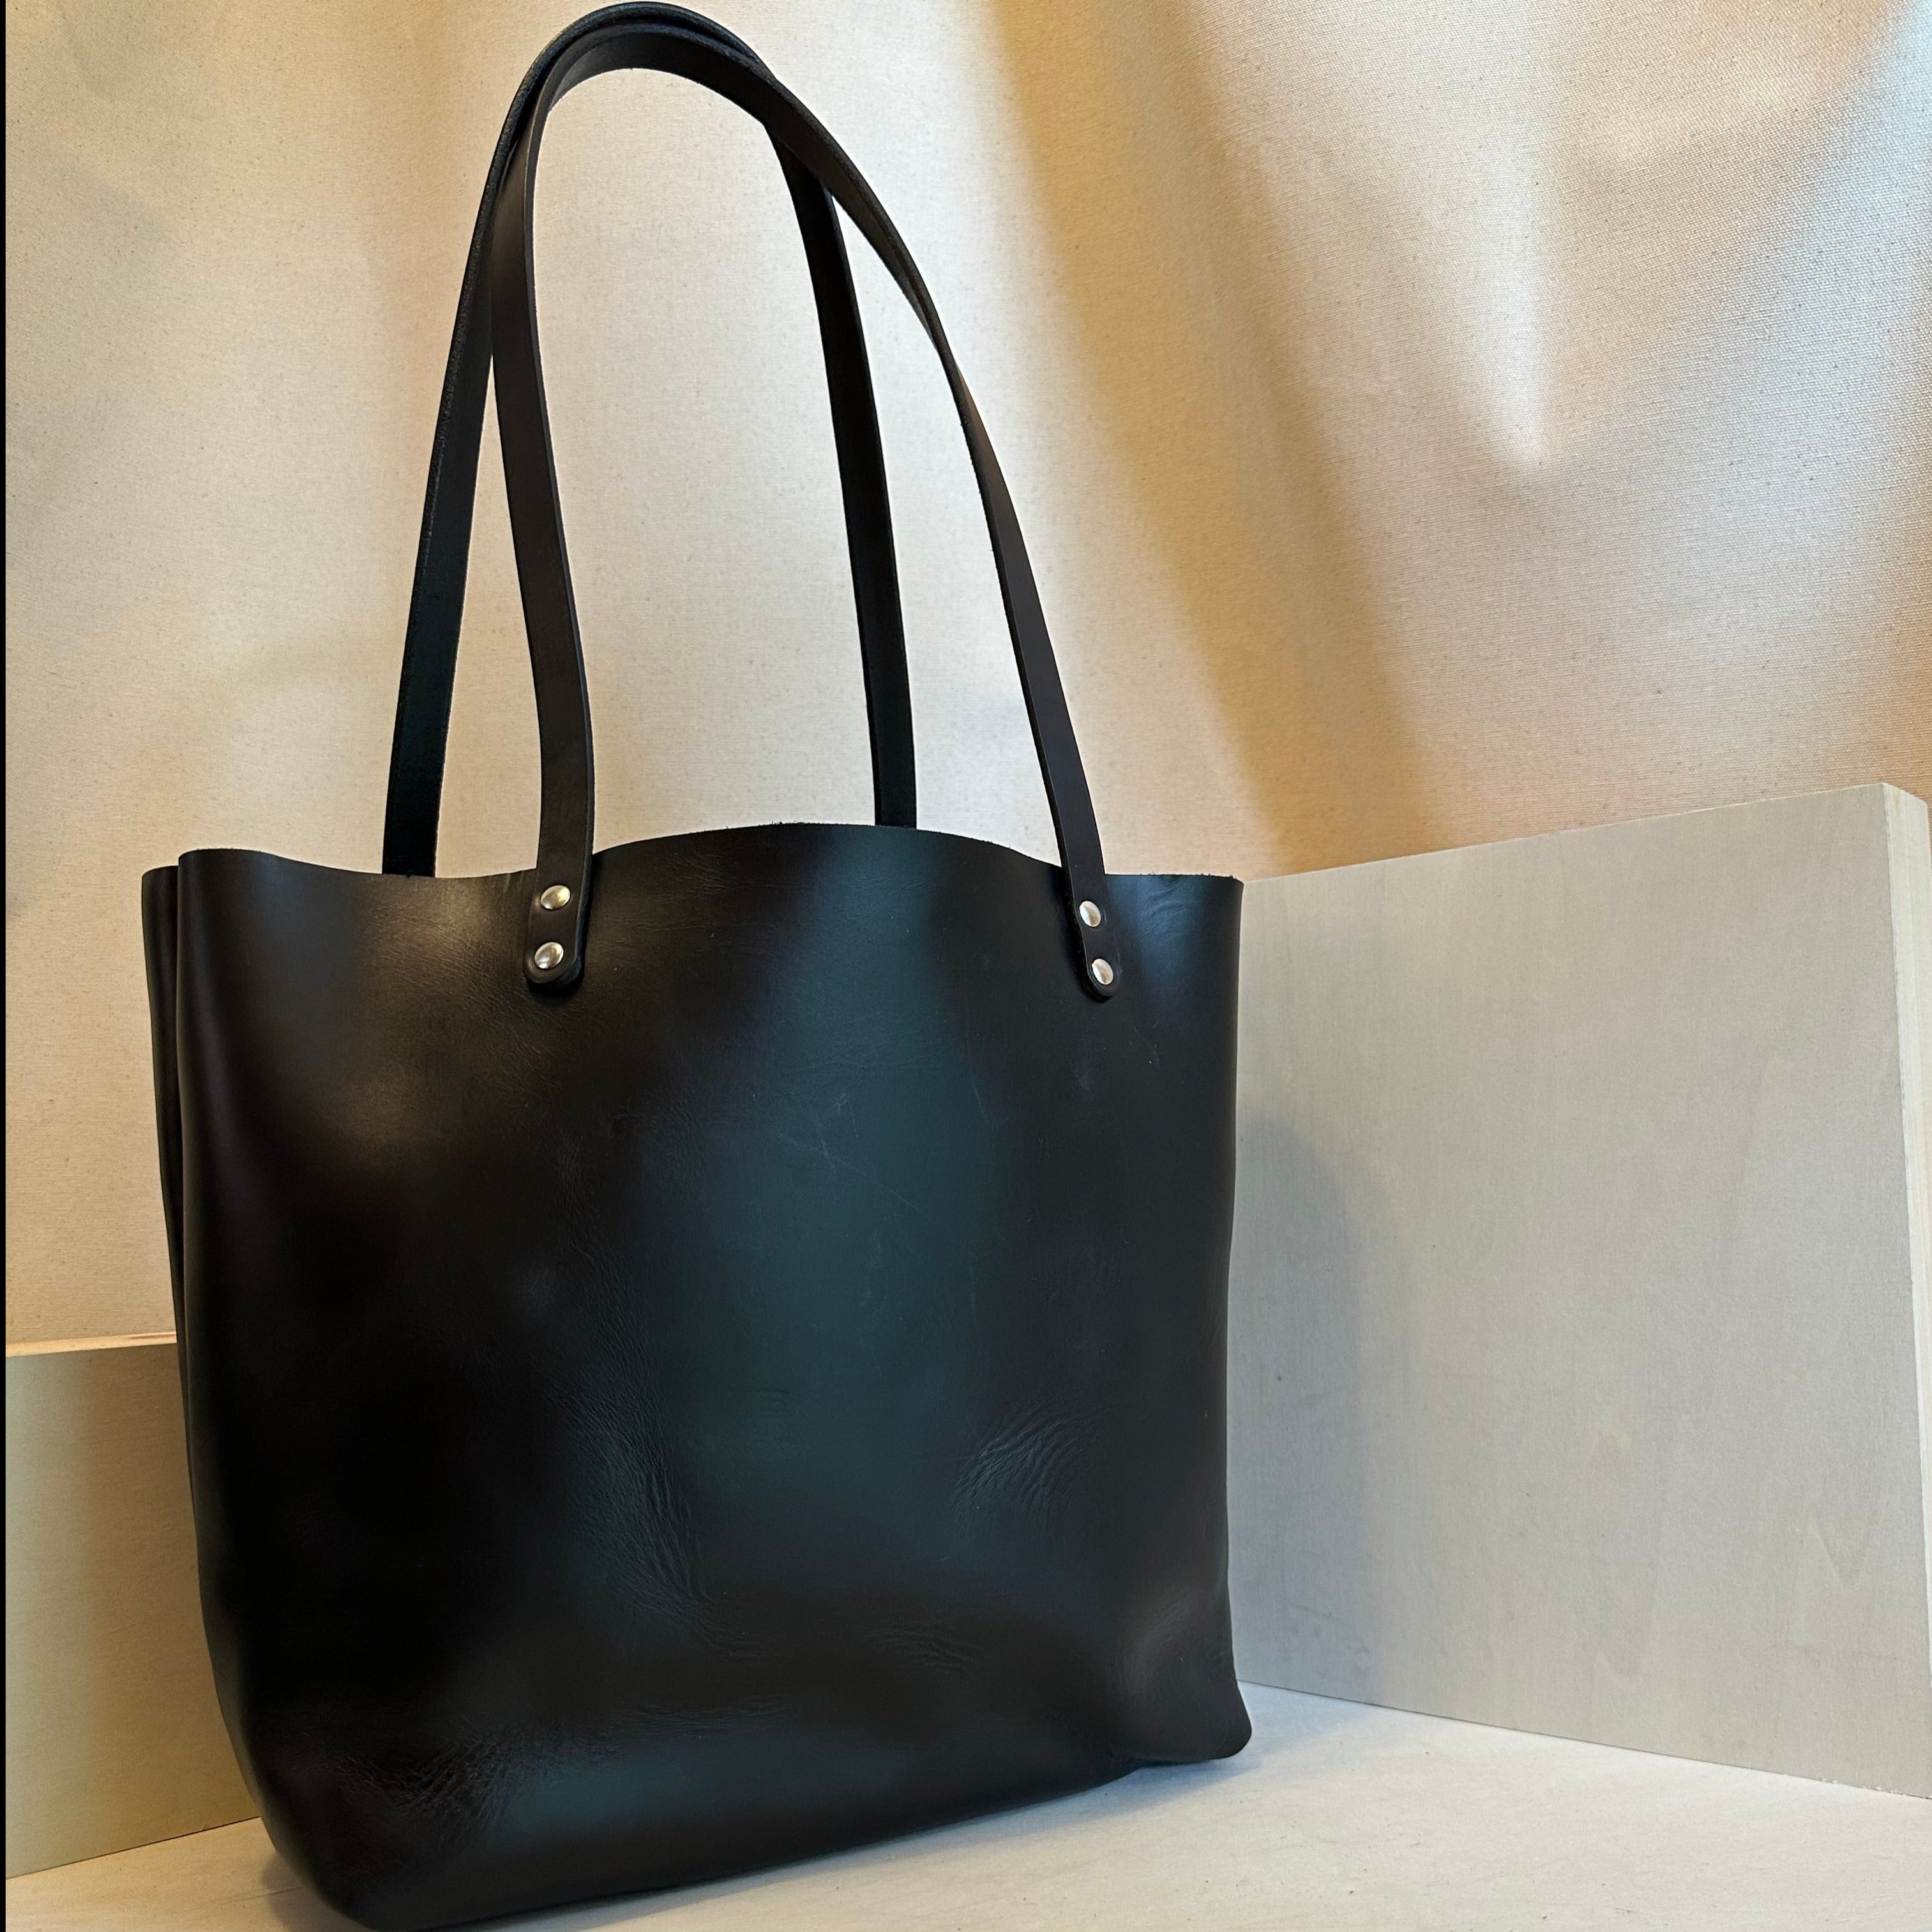 Shining Rock Goods EDC Black Tote Bag handmade with Horween Chorme XL leather in our Asheville NC Studio